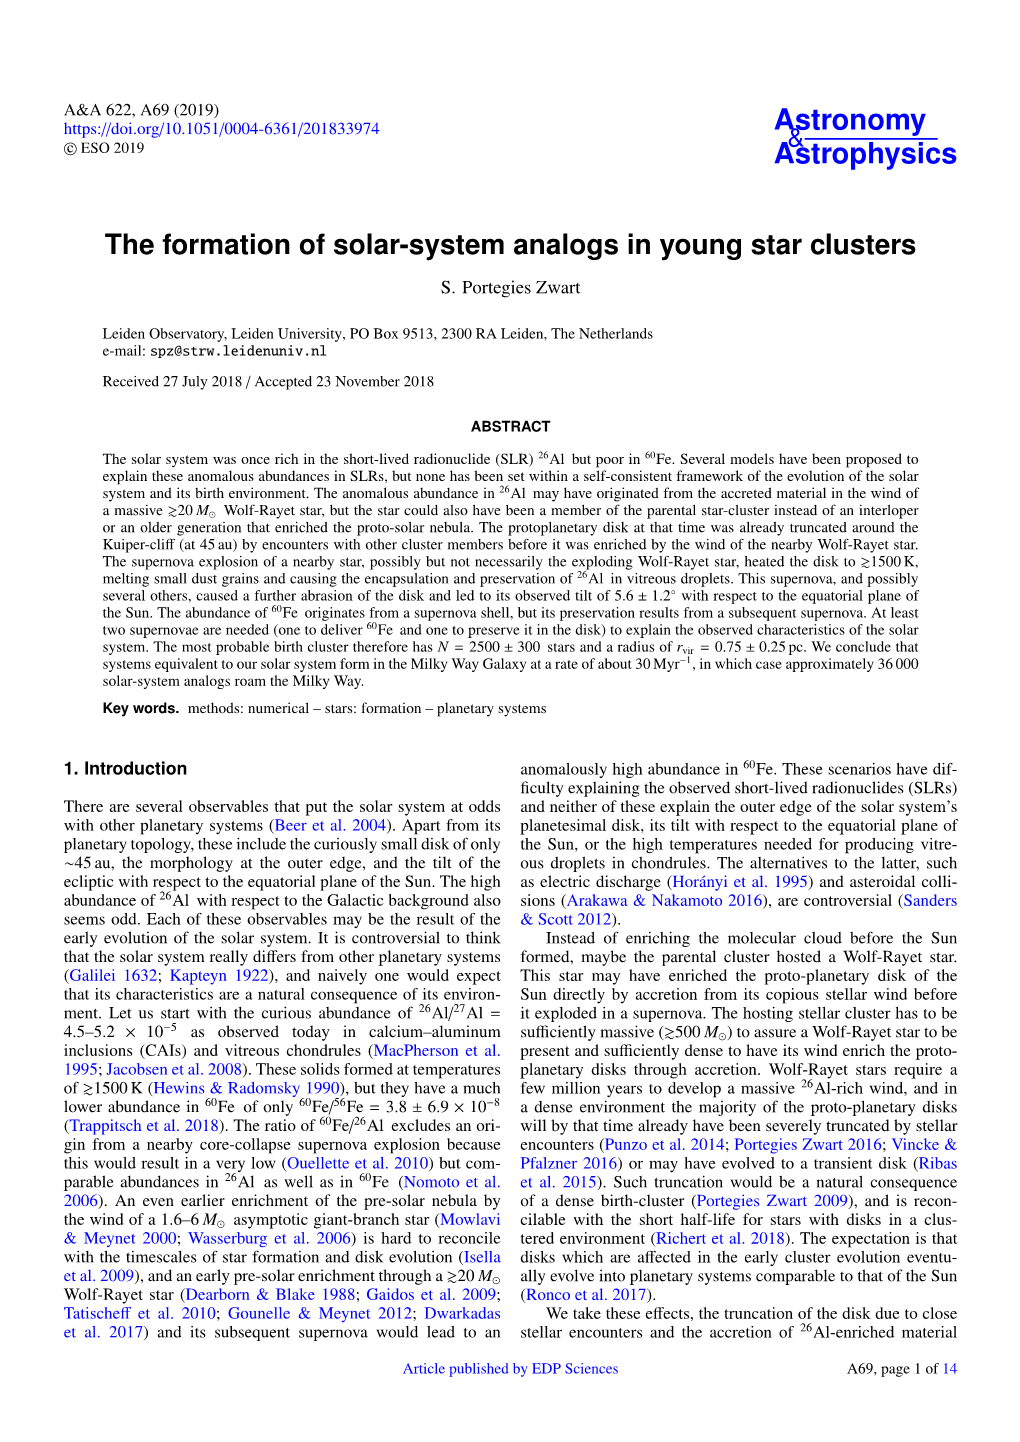 The Formation of Solar-System Analogs in Young Star Clusters S